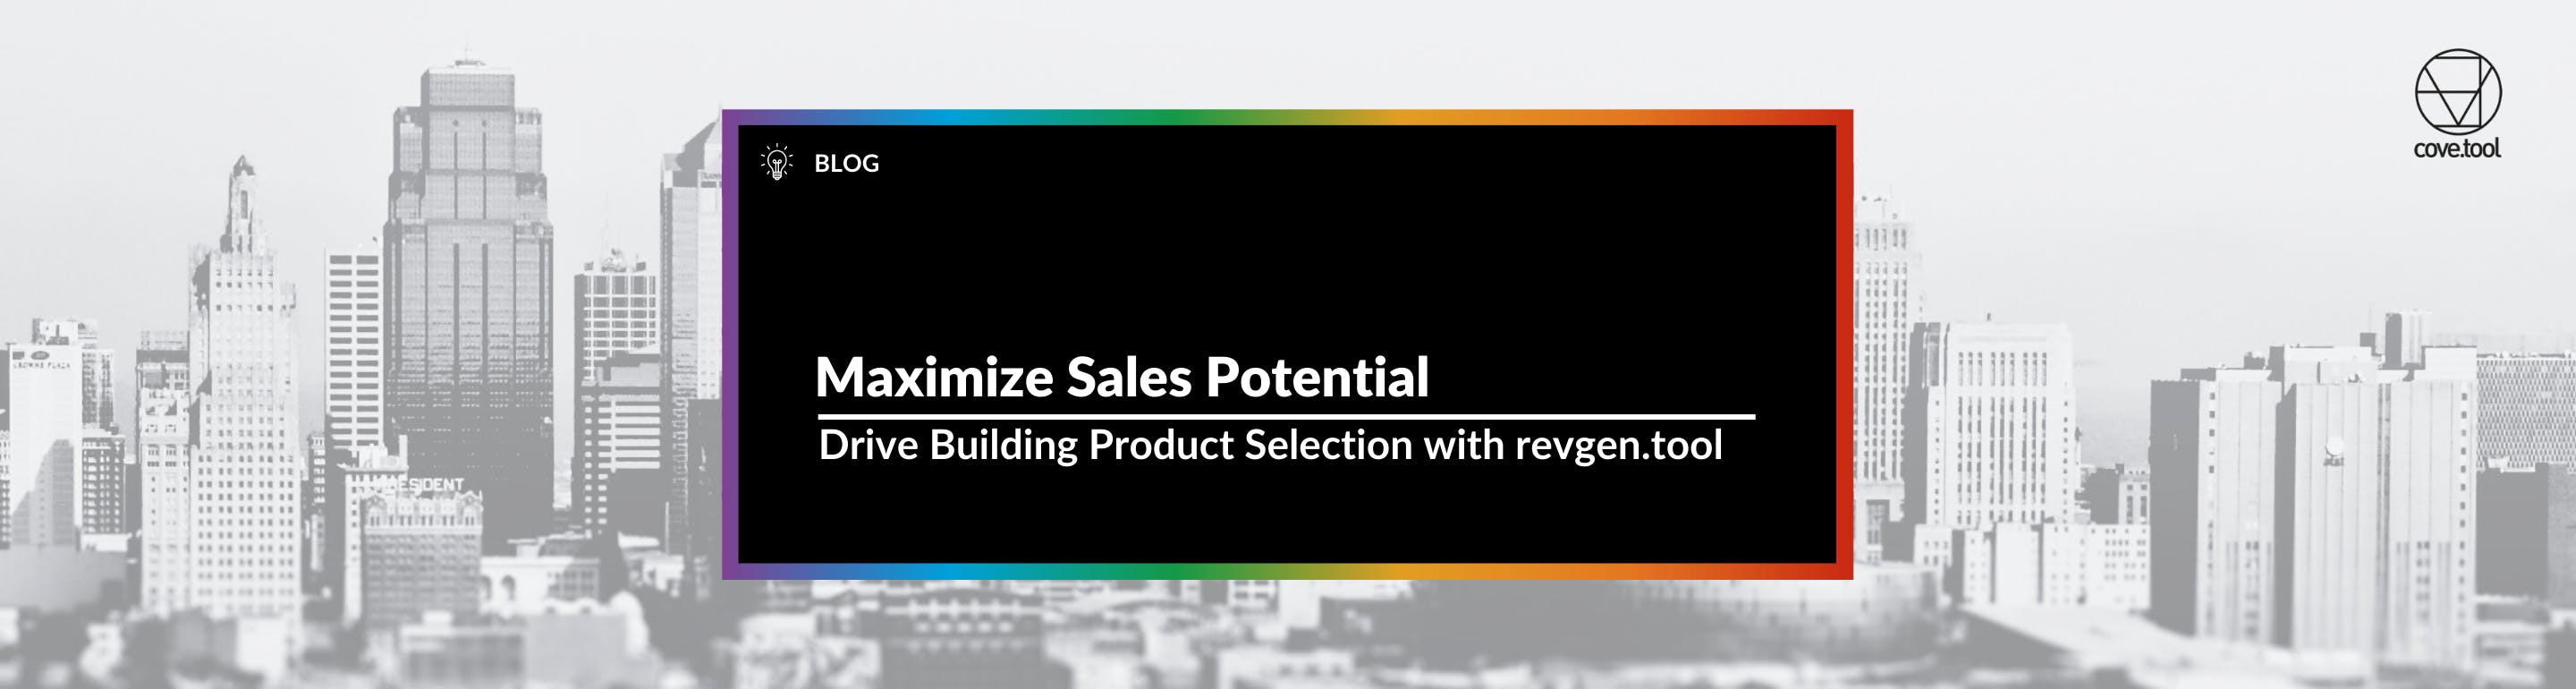 Maximize Sales Potential Drive Product Building Selection with revgen.tool